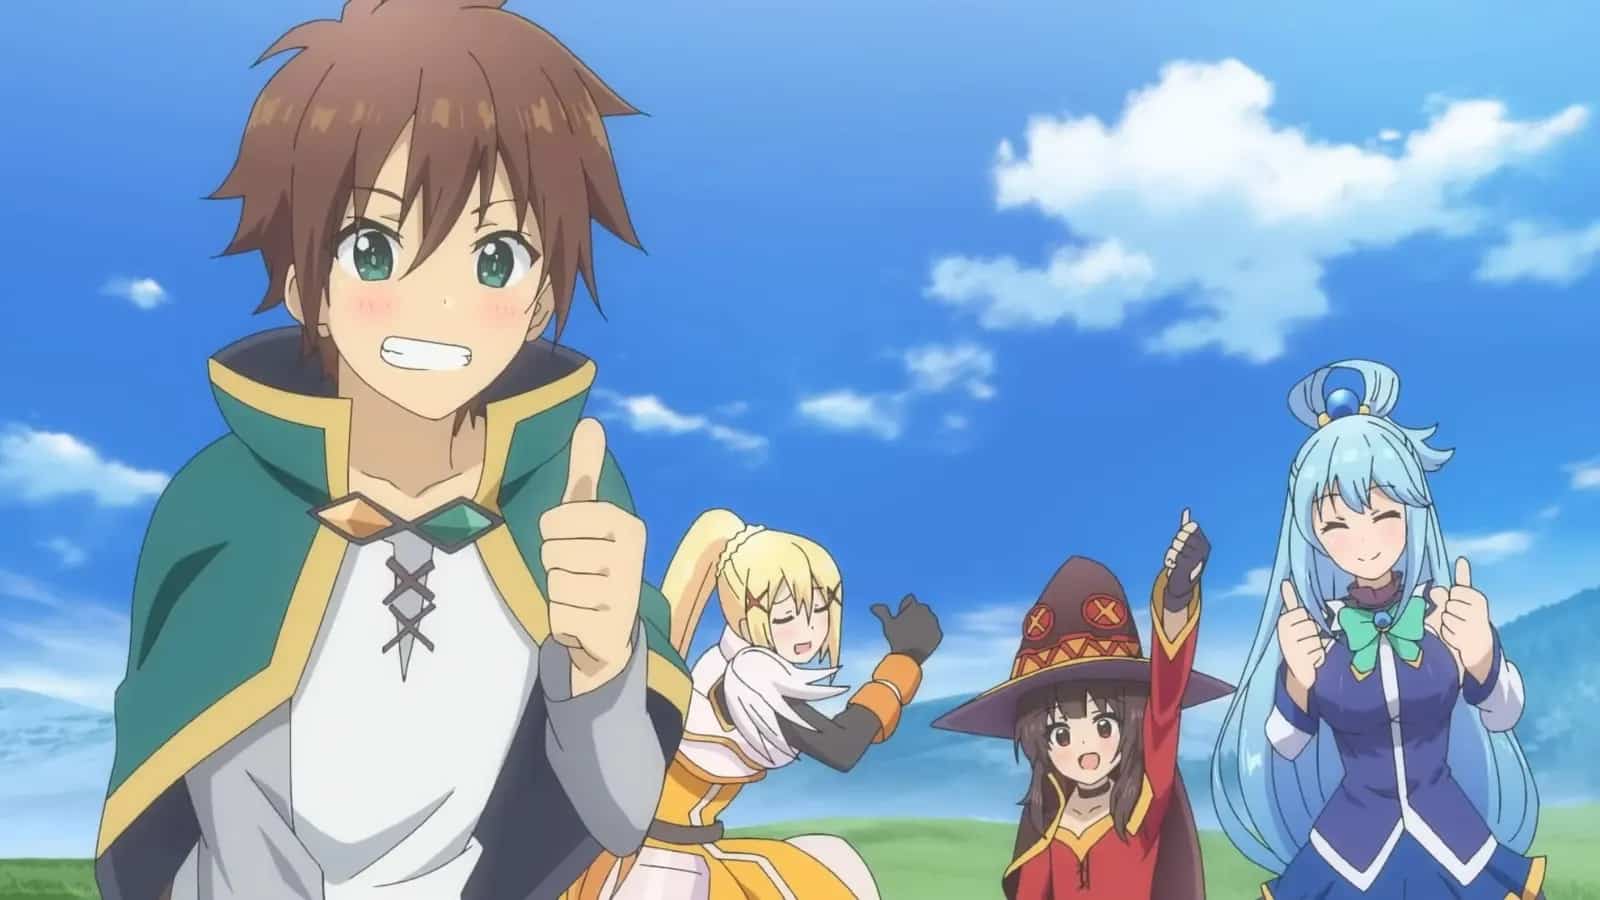 Konosuba: Megumin spin off releases its first trailer